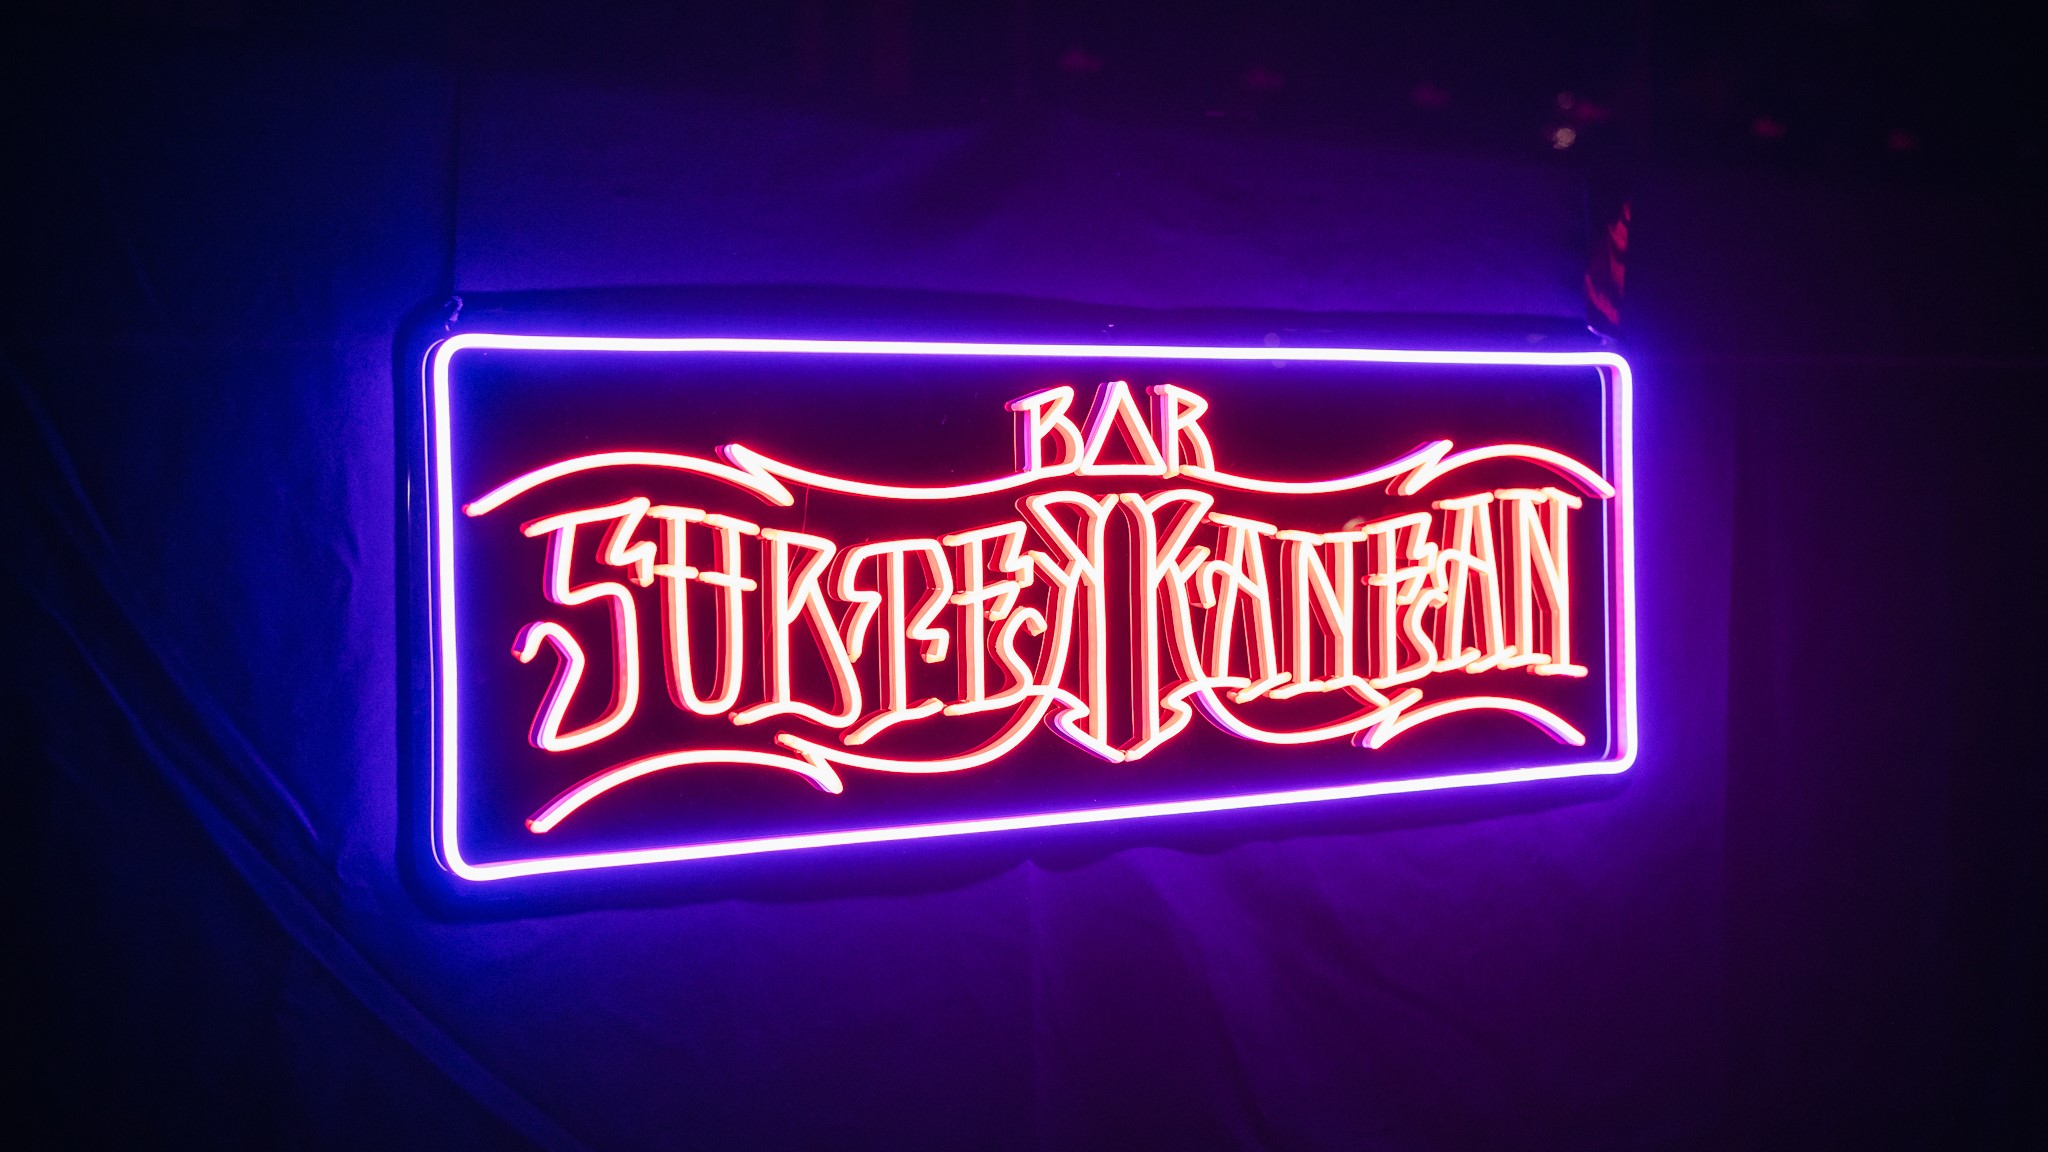 Close up of red and blue LED 'Bar Subterranean' light